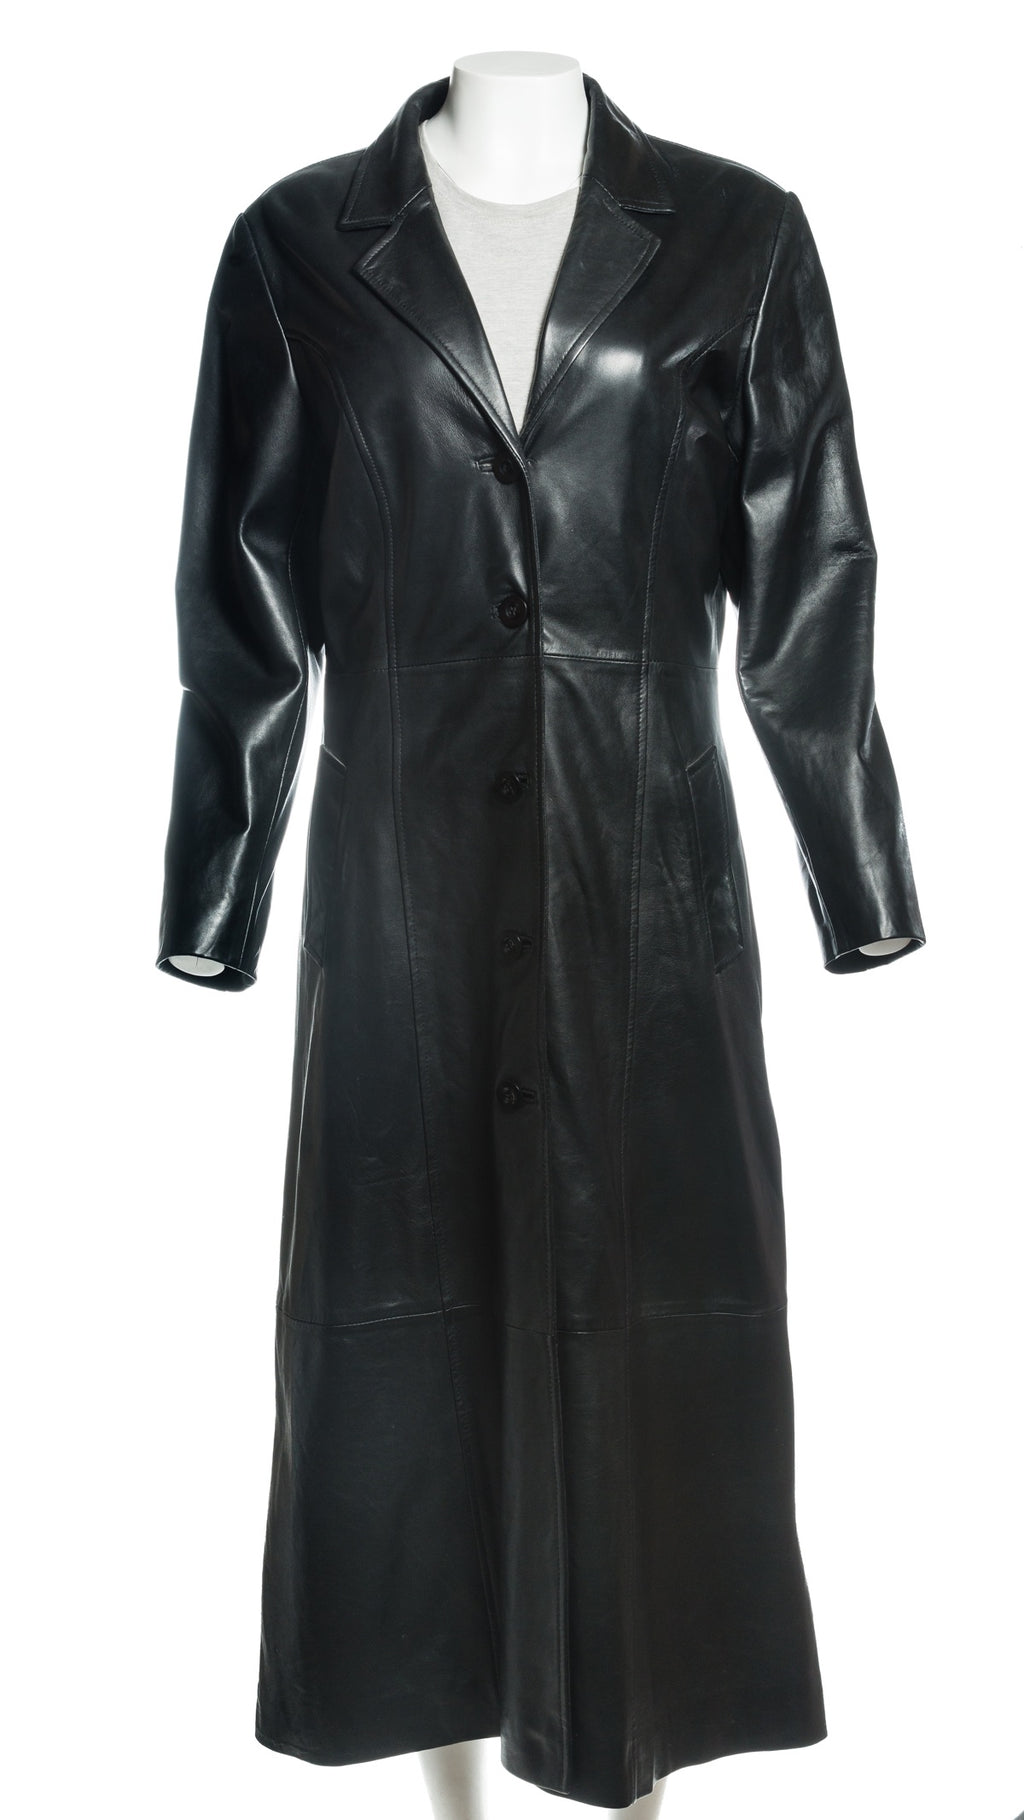 Ladies Black Full Length Buttoned Leather Coat: Gina